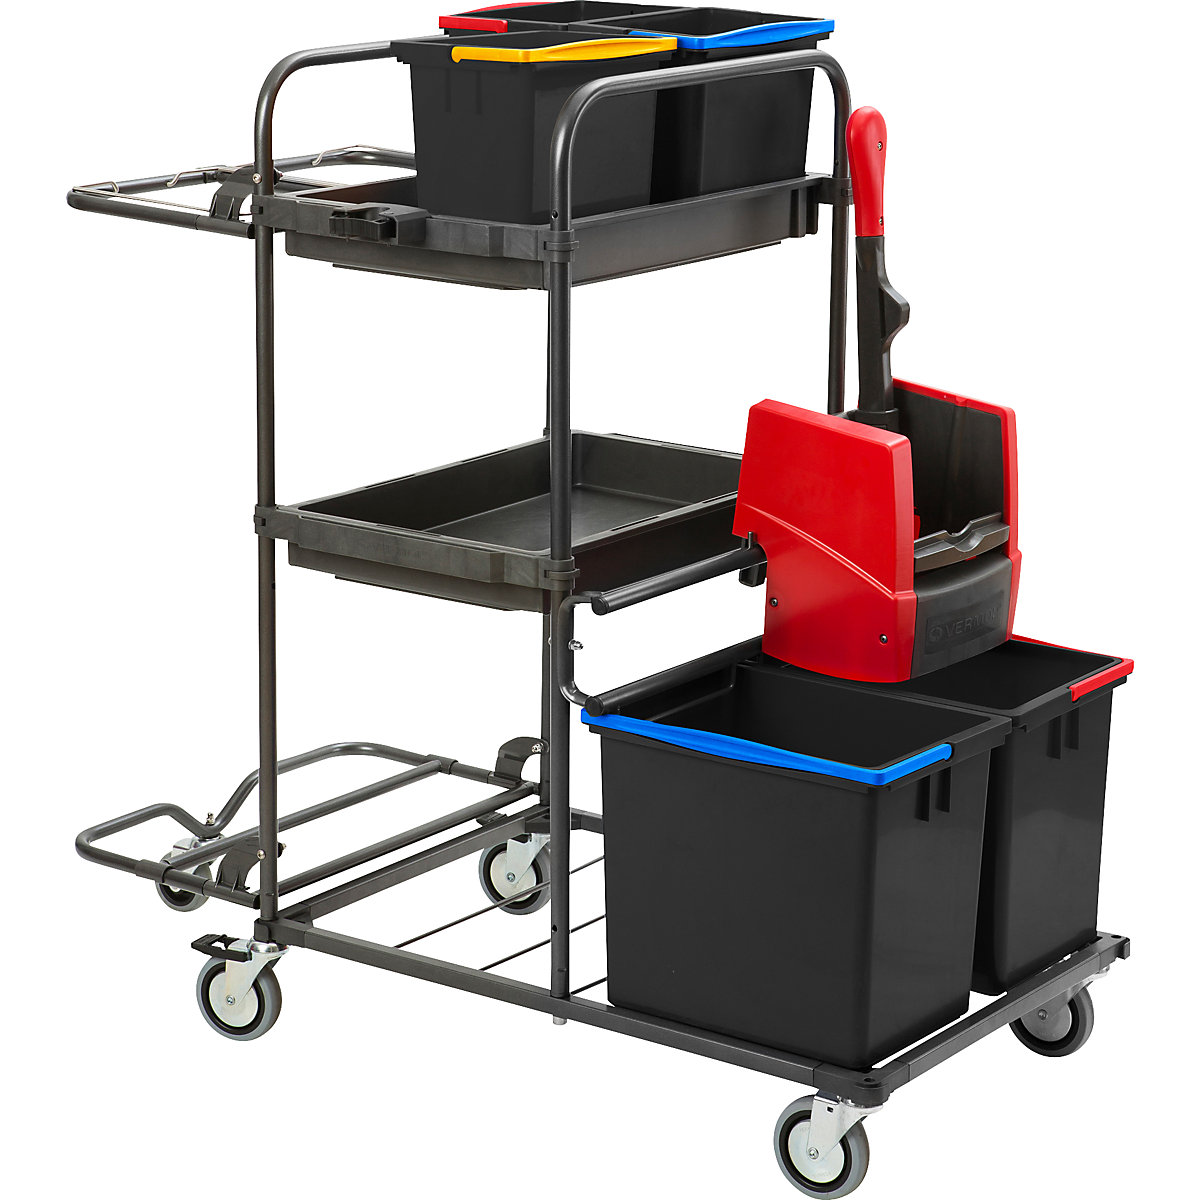 MISTRAL cleaning trolley – Vermop